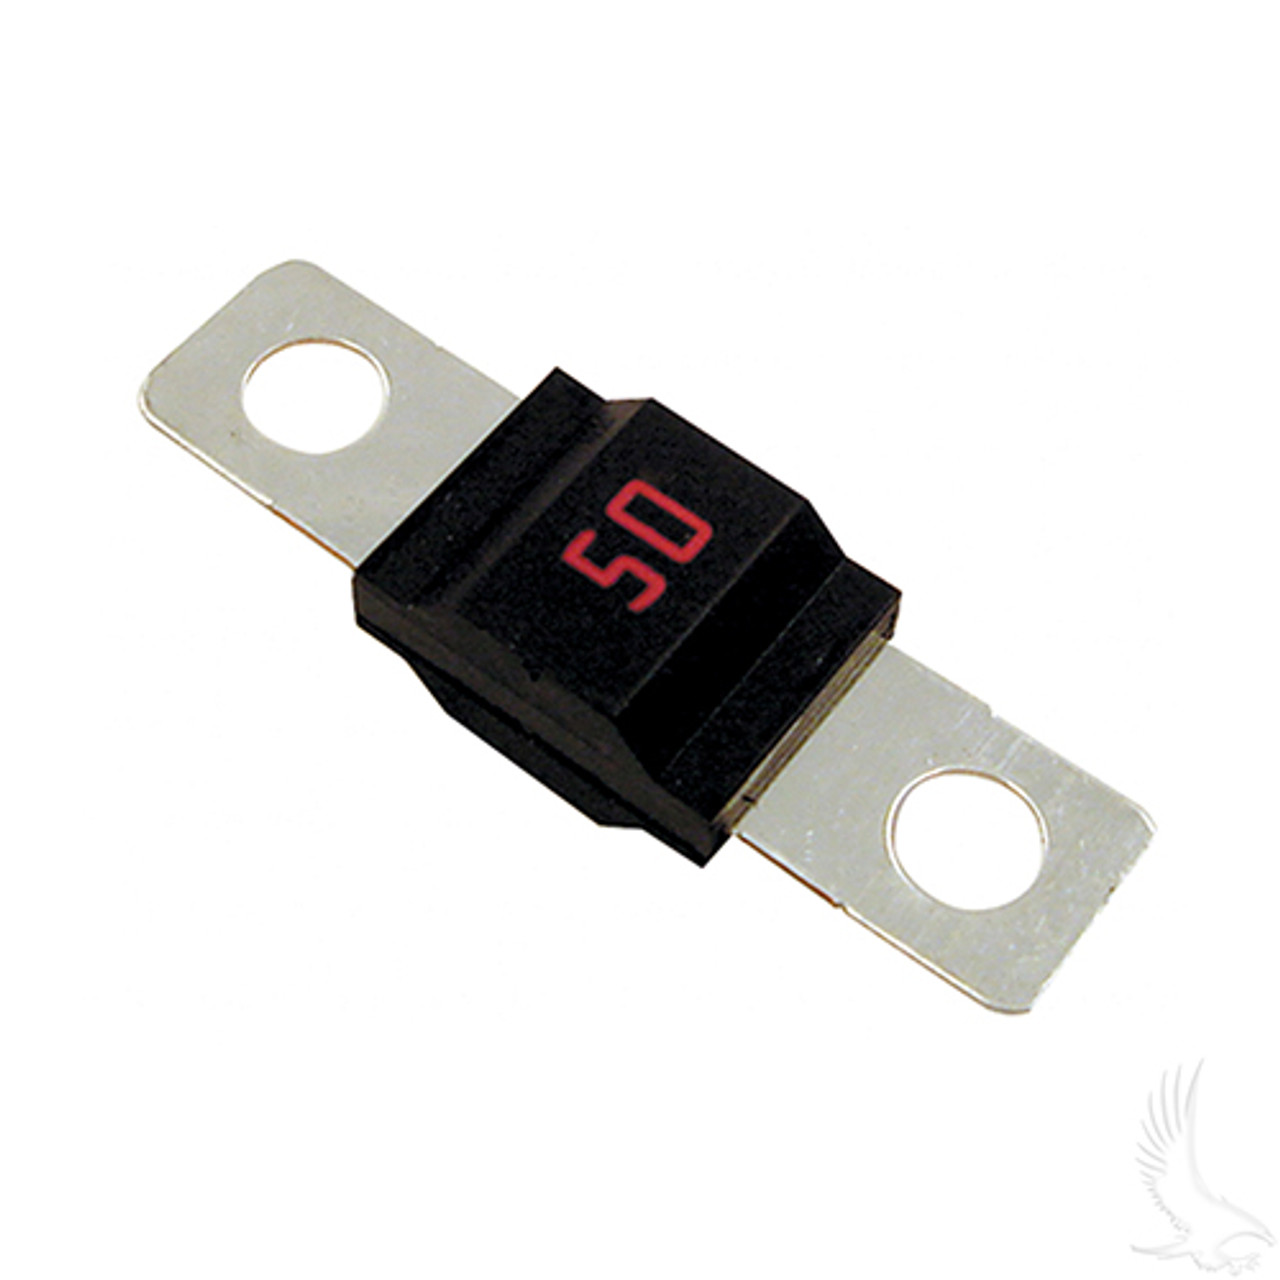 50 Amp EZGO PowerWise/PowerWise+ Battery Charger Fuse - 50A, CGR-068, 28106G01, 5555